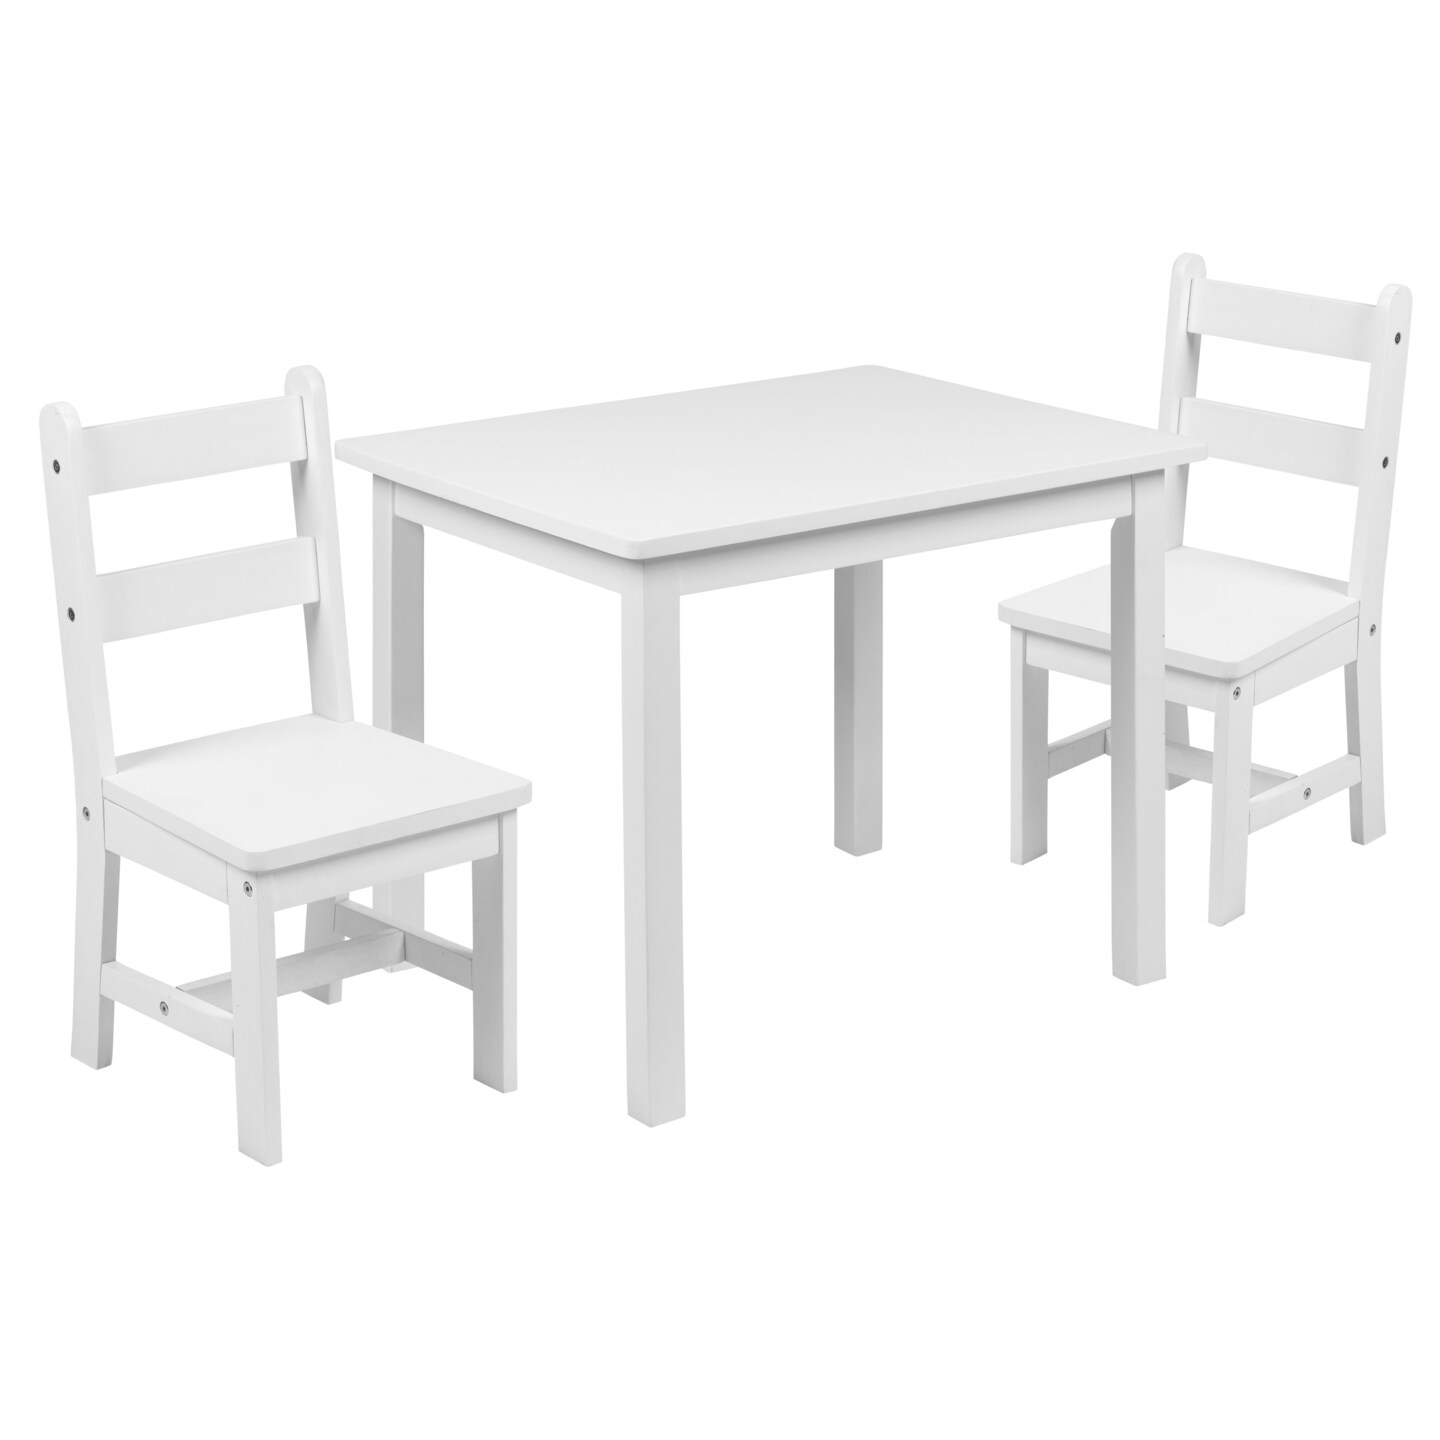 Emma and Oliver Kids 3 Piece Solid Hardwood Table and Chair Set for Playroom, Kitchen